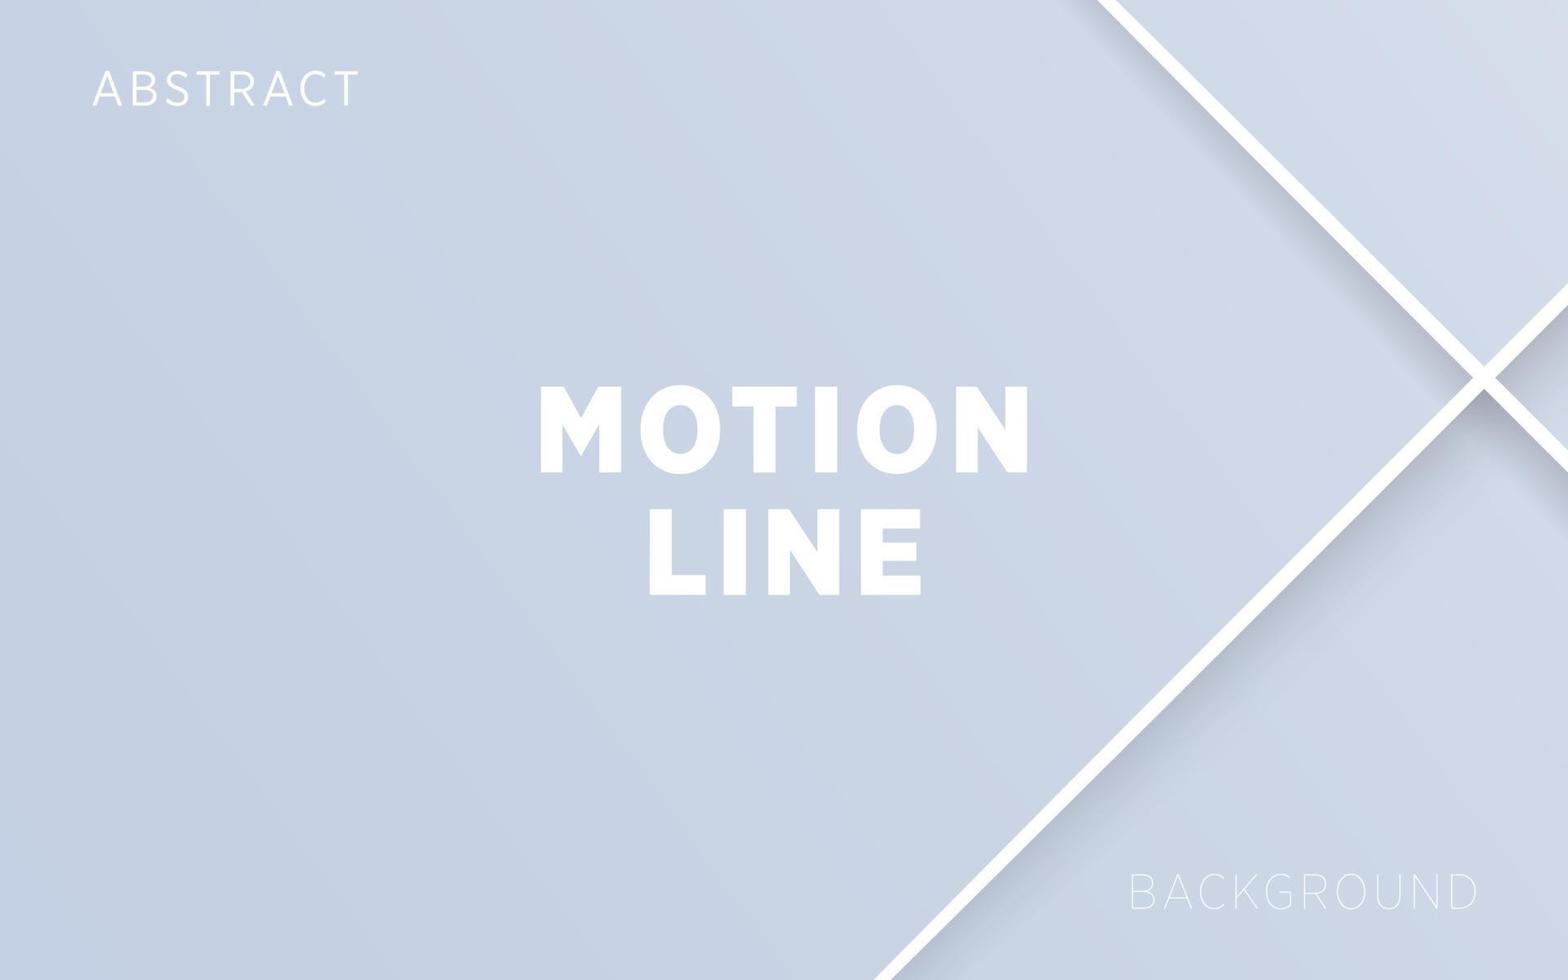 modern abstract motion line background banner.digital template.can be used in cover design, poster, flyer, book design, website backgrounds or advertising.vector illustration. vector